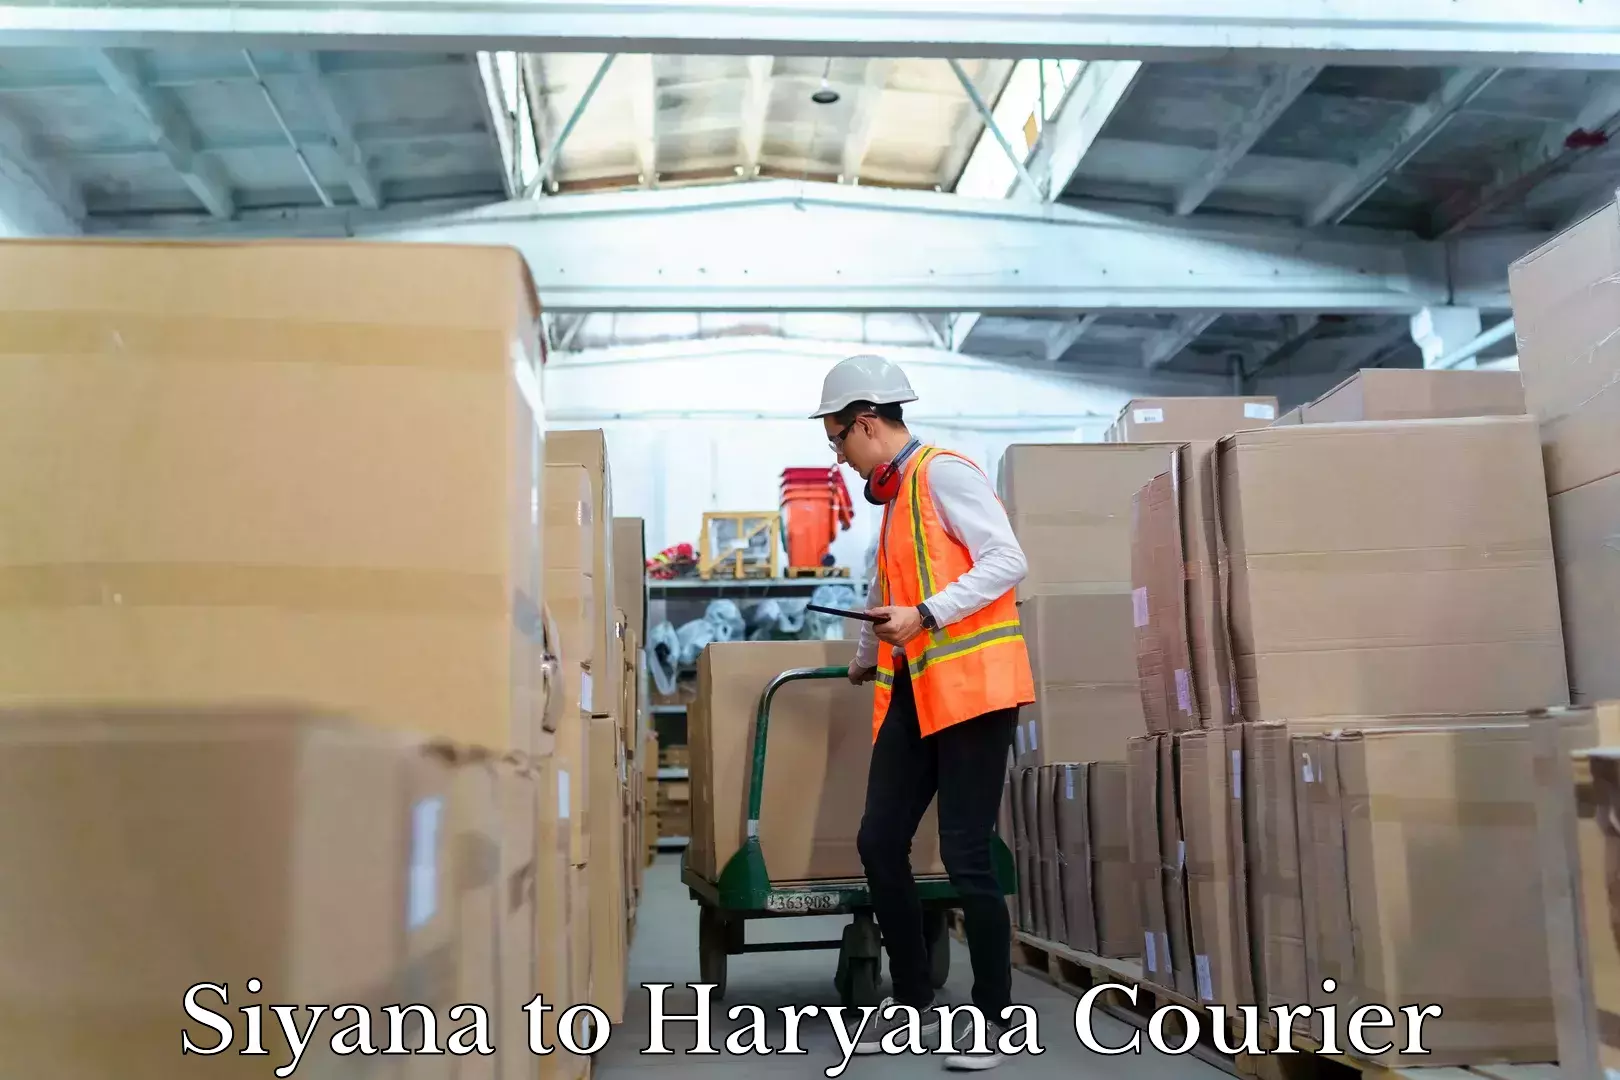 State-of-the-art courier technology Siyana to Haryana